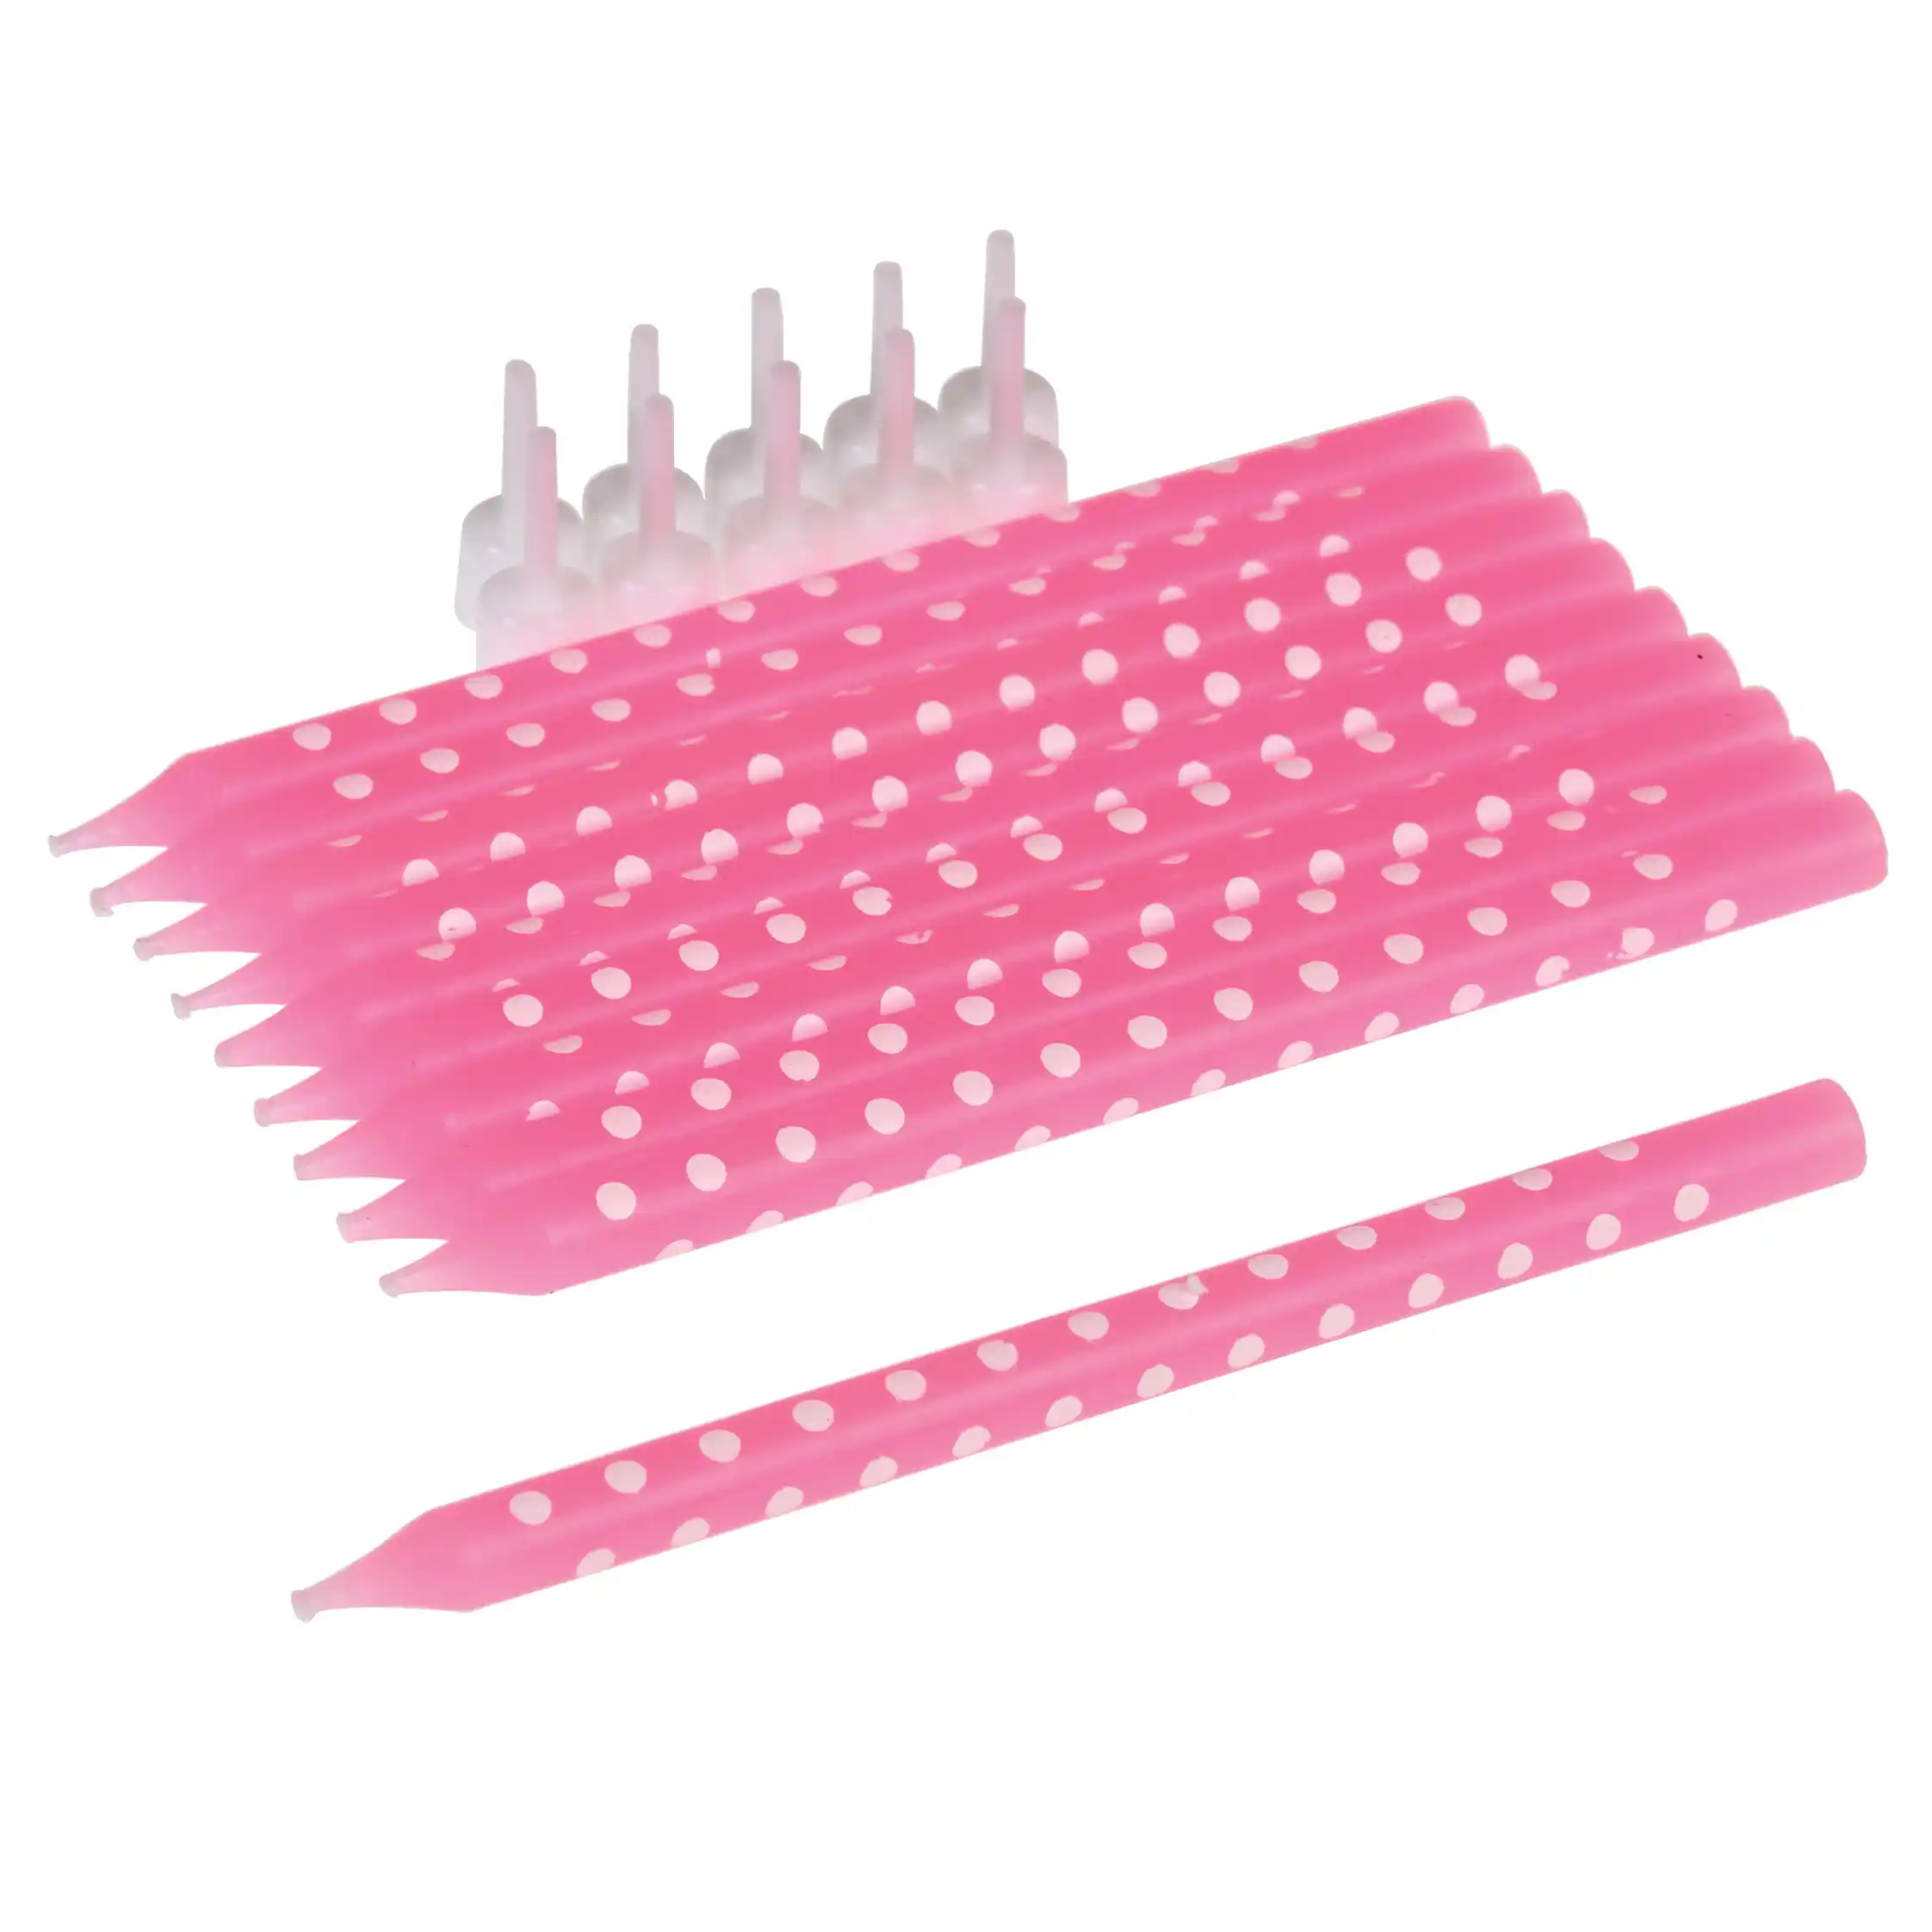 spotty cake candles (pack of 10) - pink